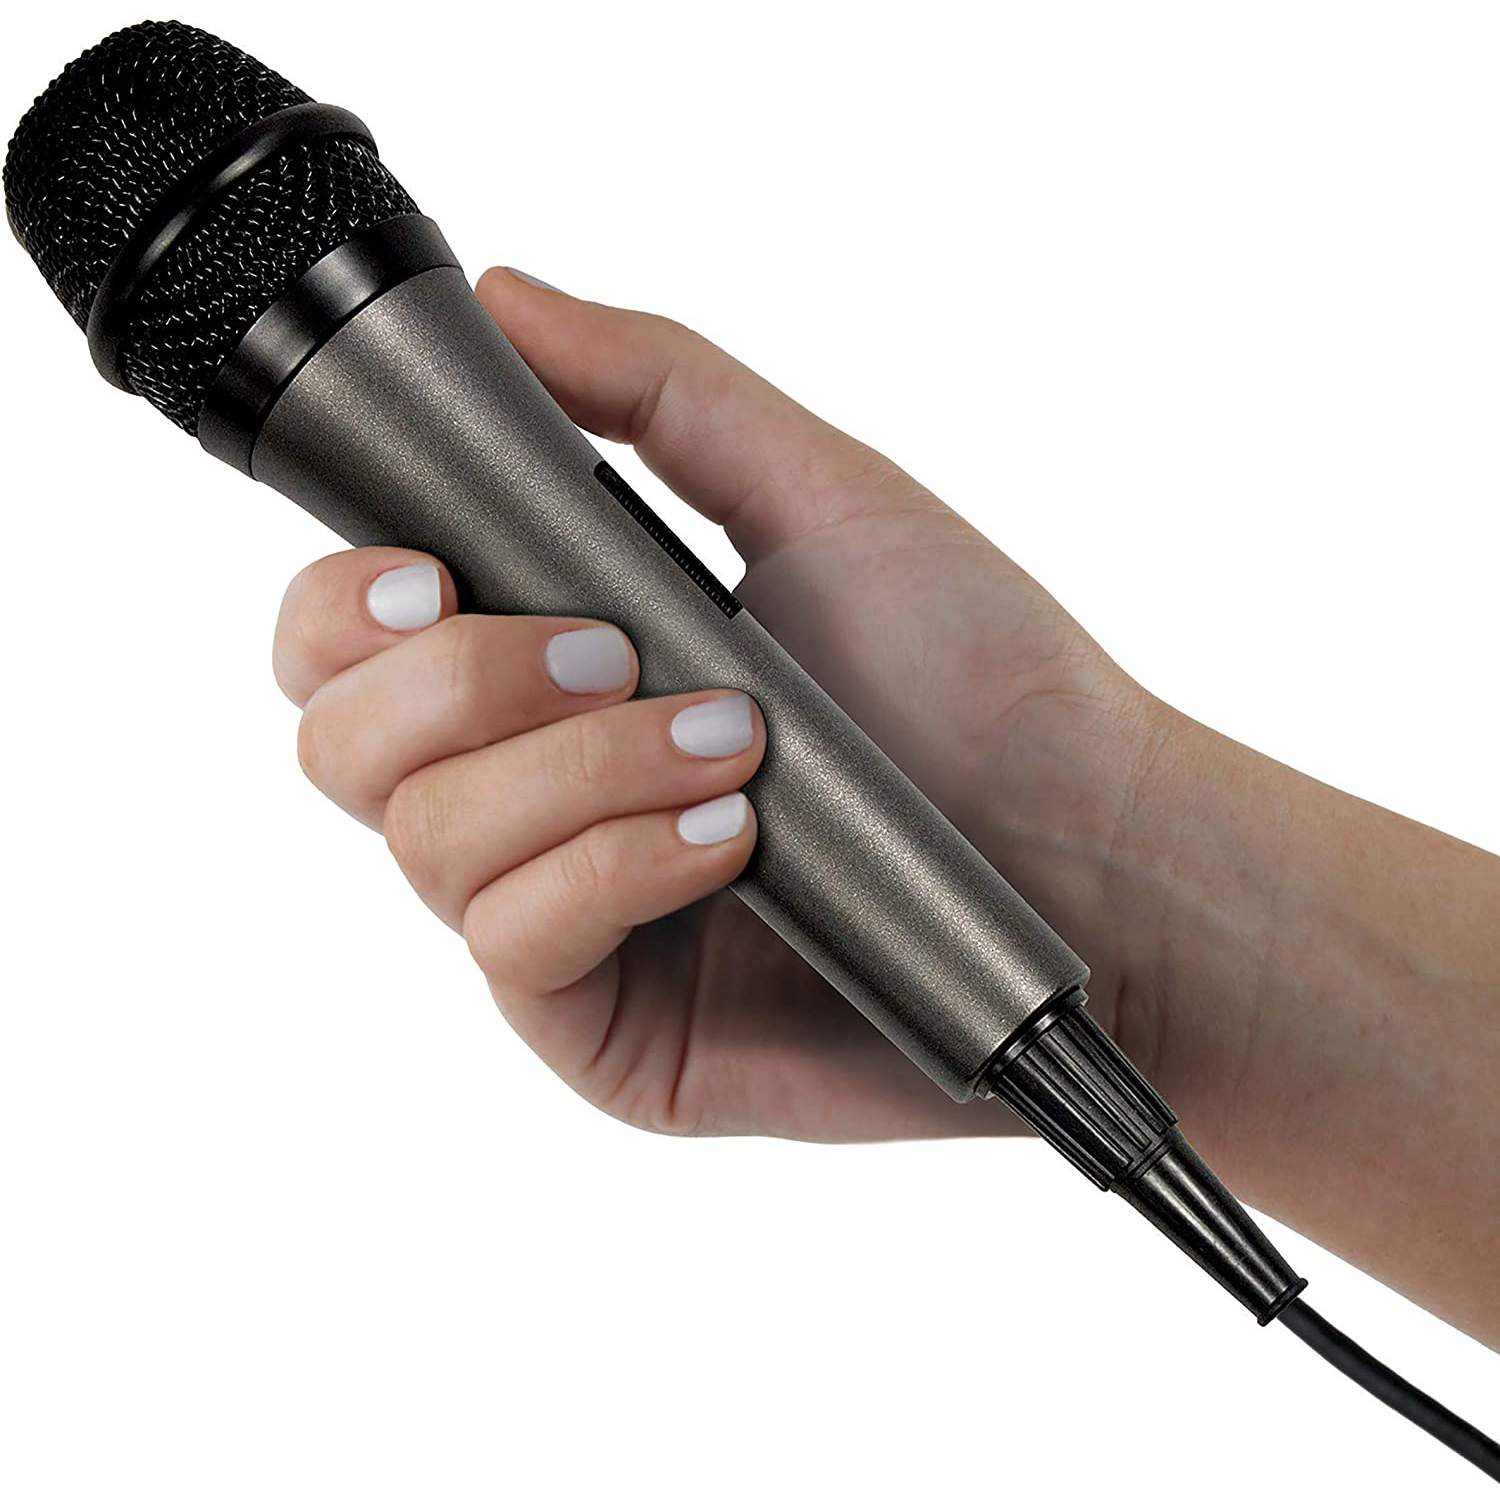 Singing Machine SMM-205 Unidirectional Dynamic Microphone with 10 Ft. Cord,Black, one size